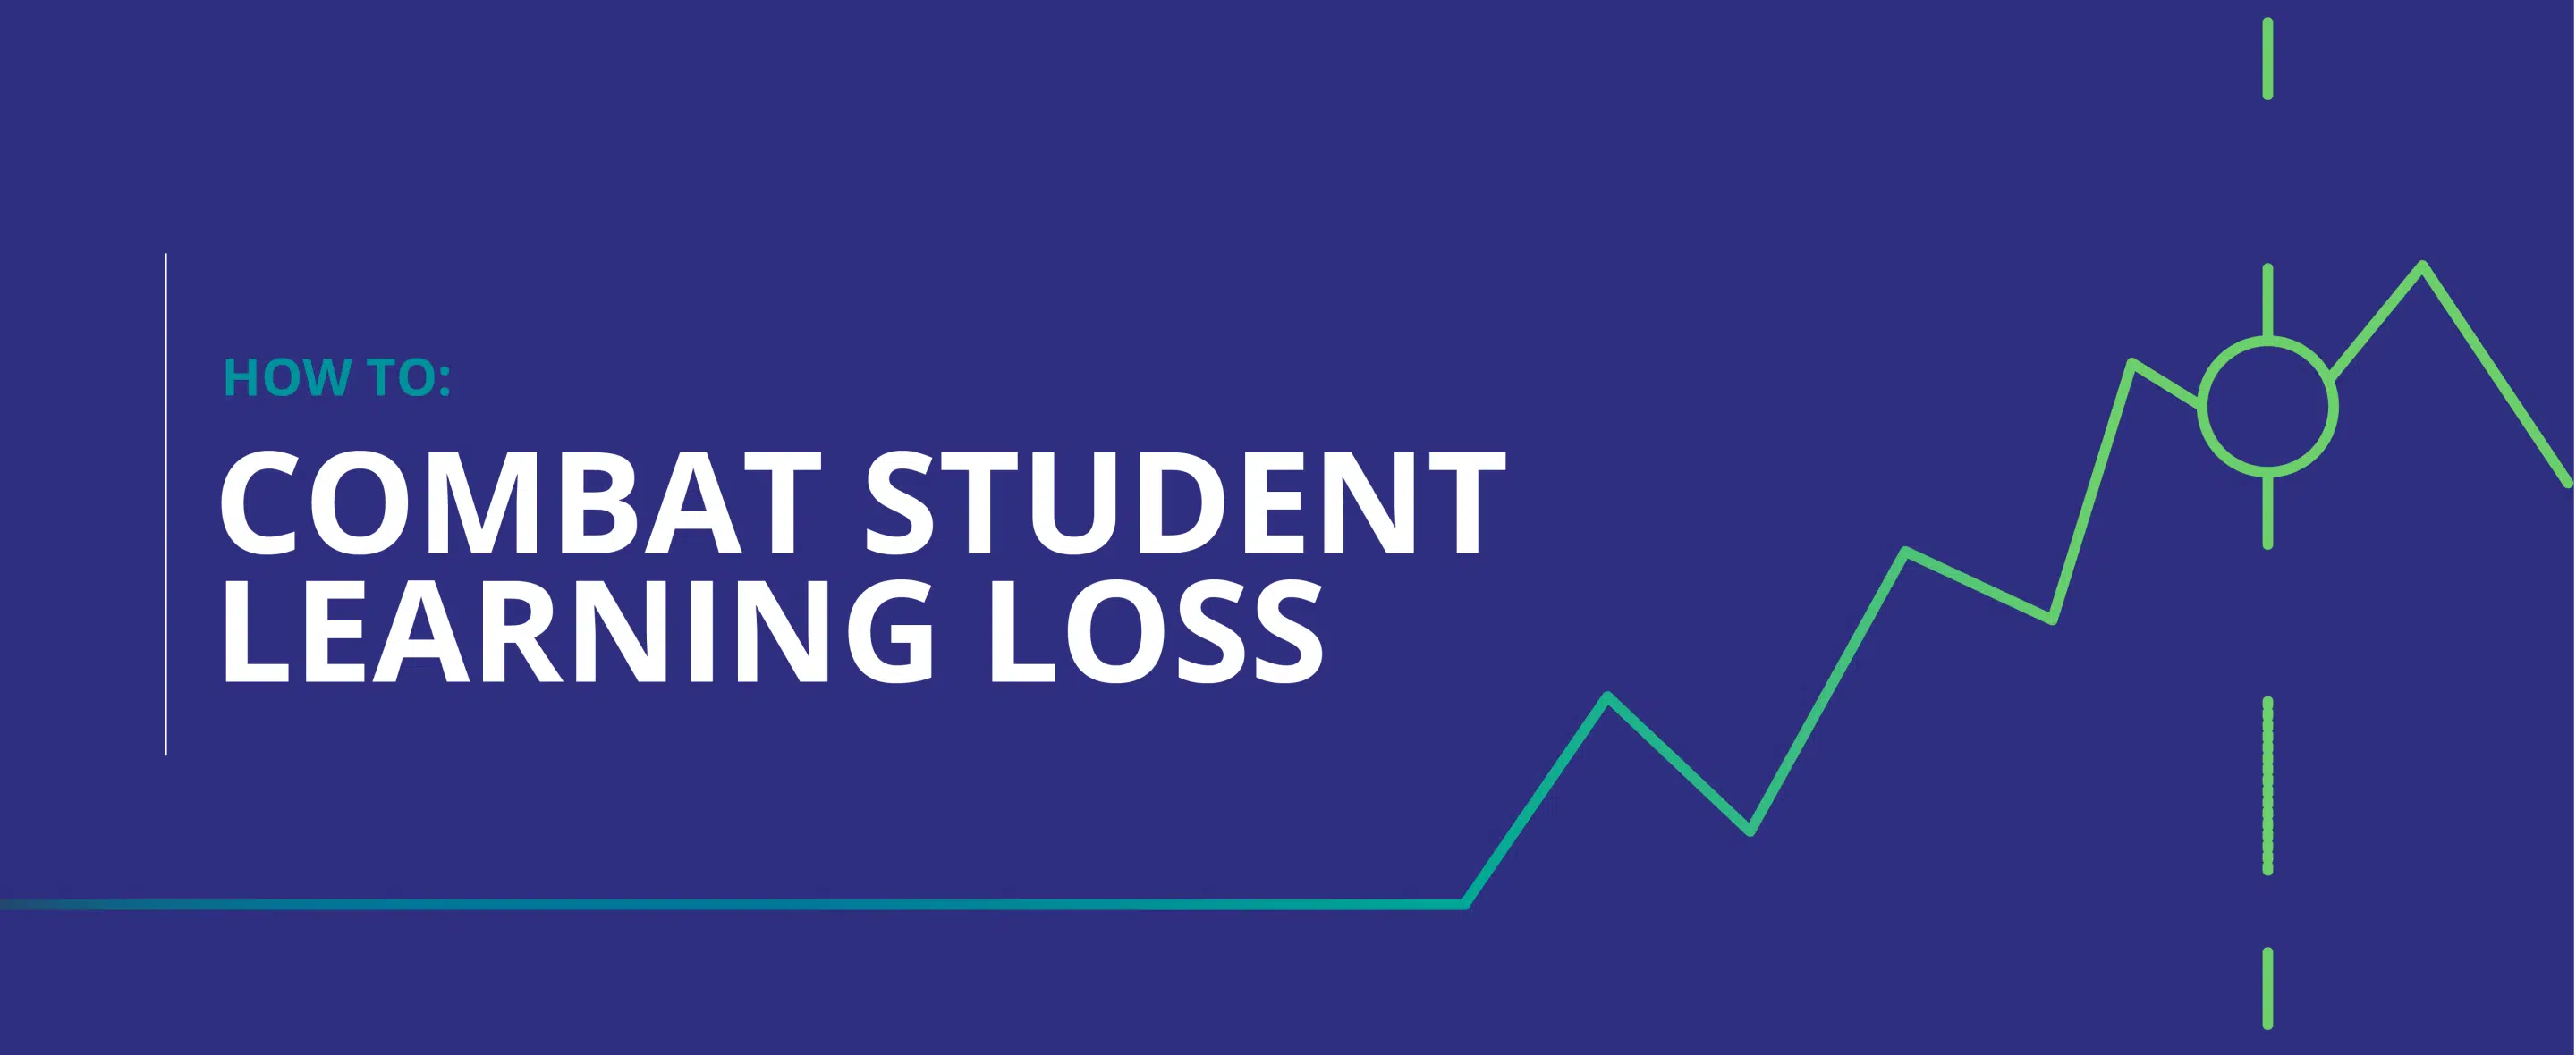 How to combat student learning loss with Precision Exams by YouScience